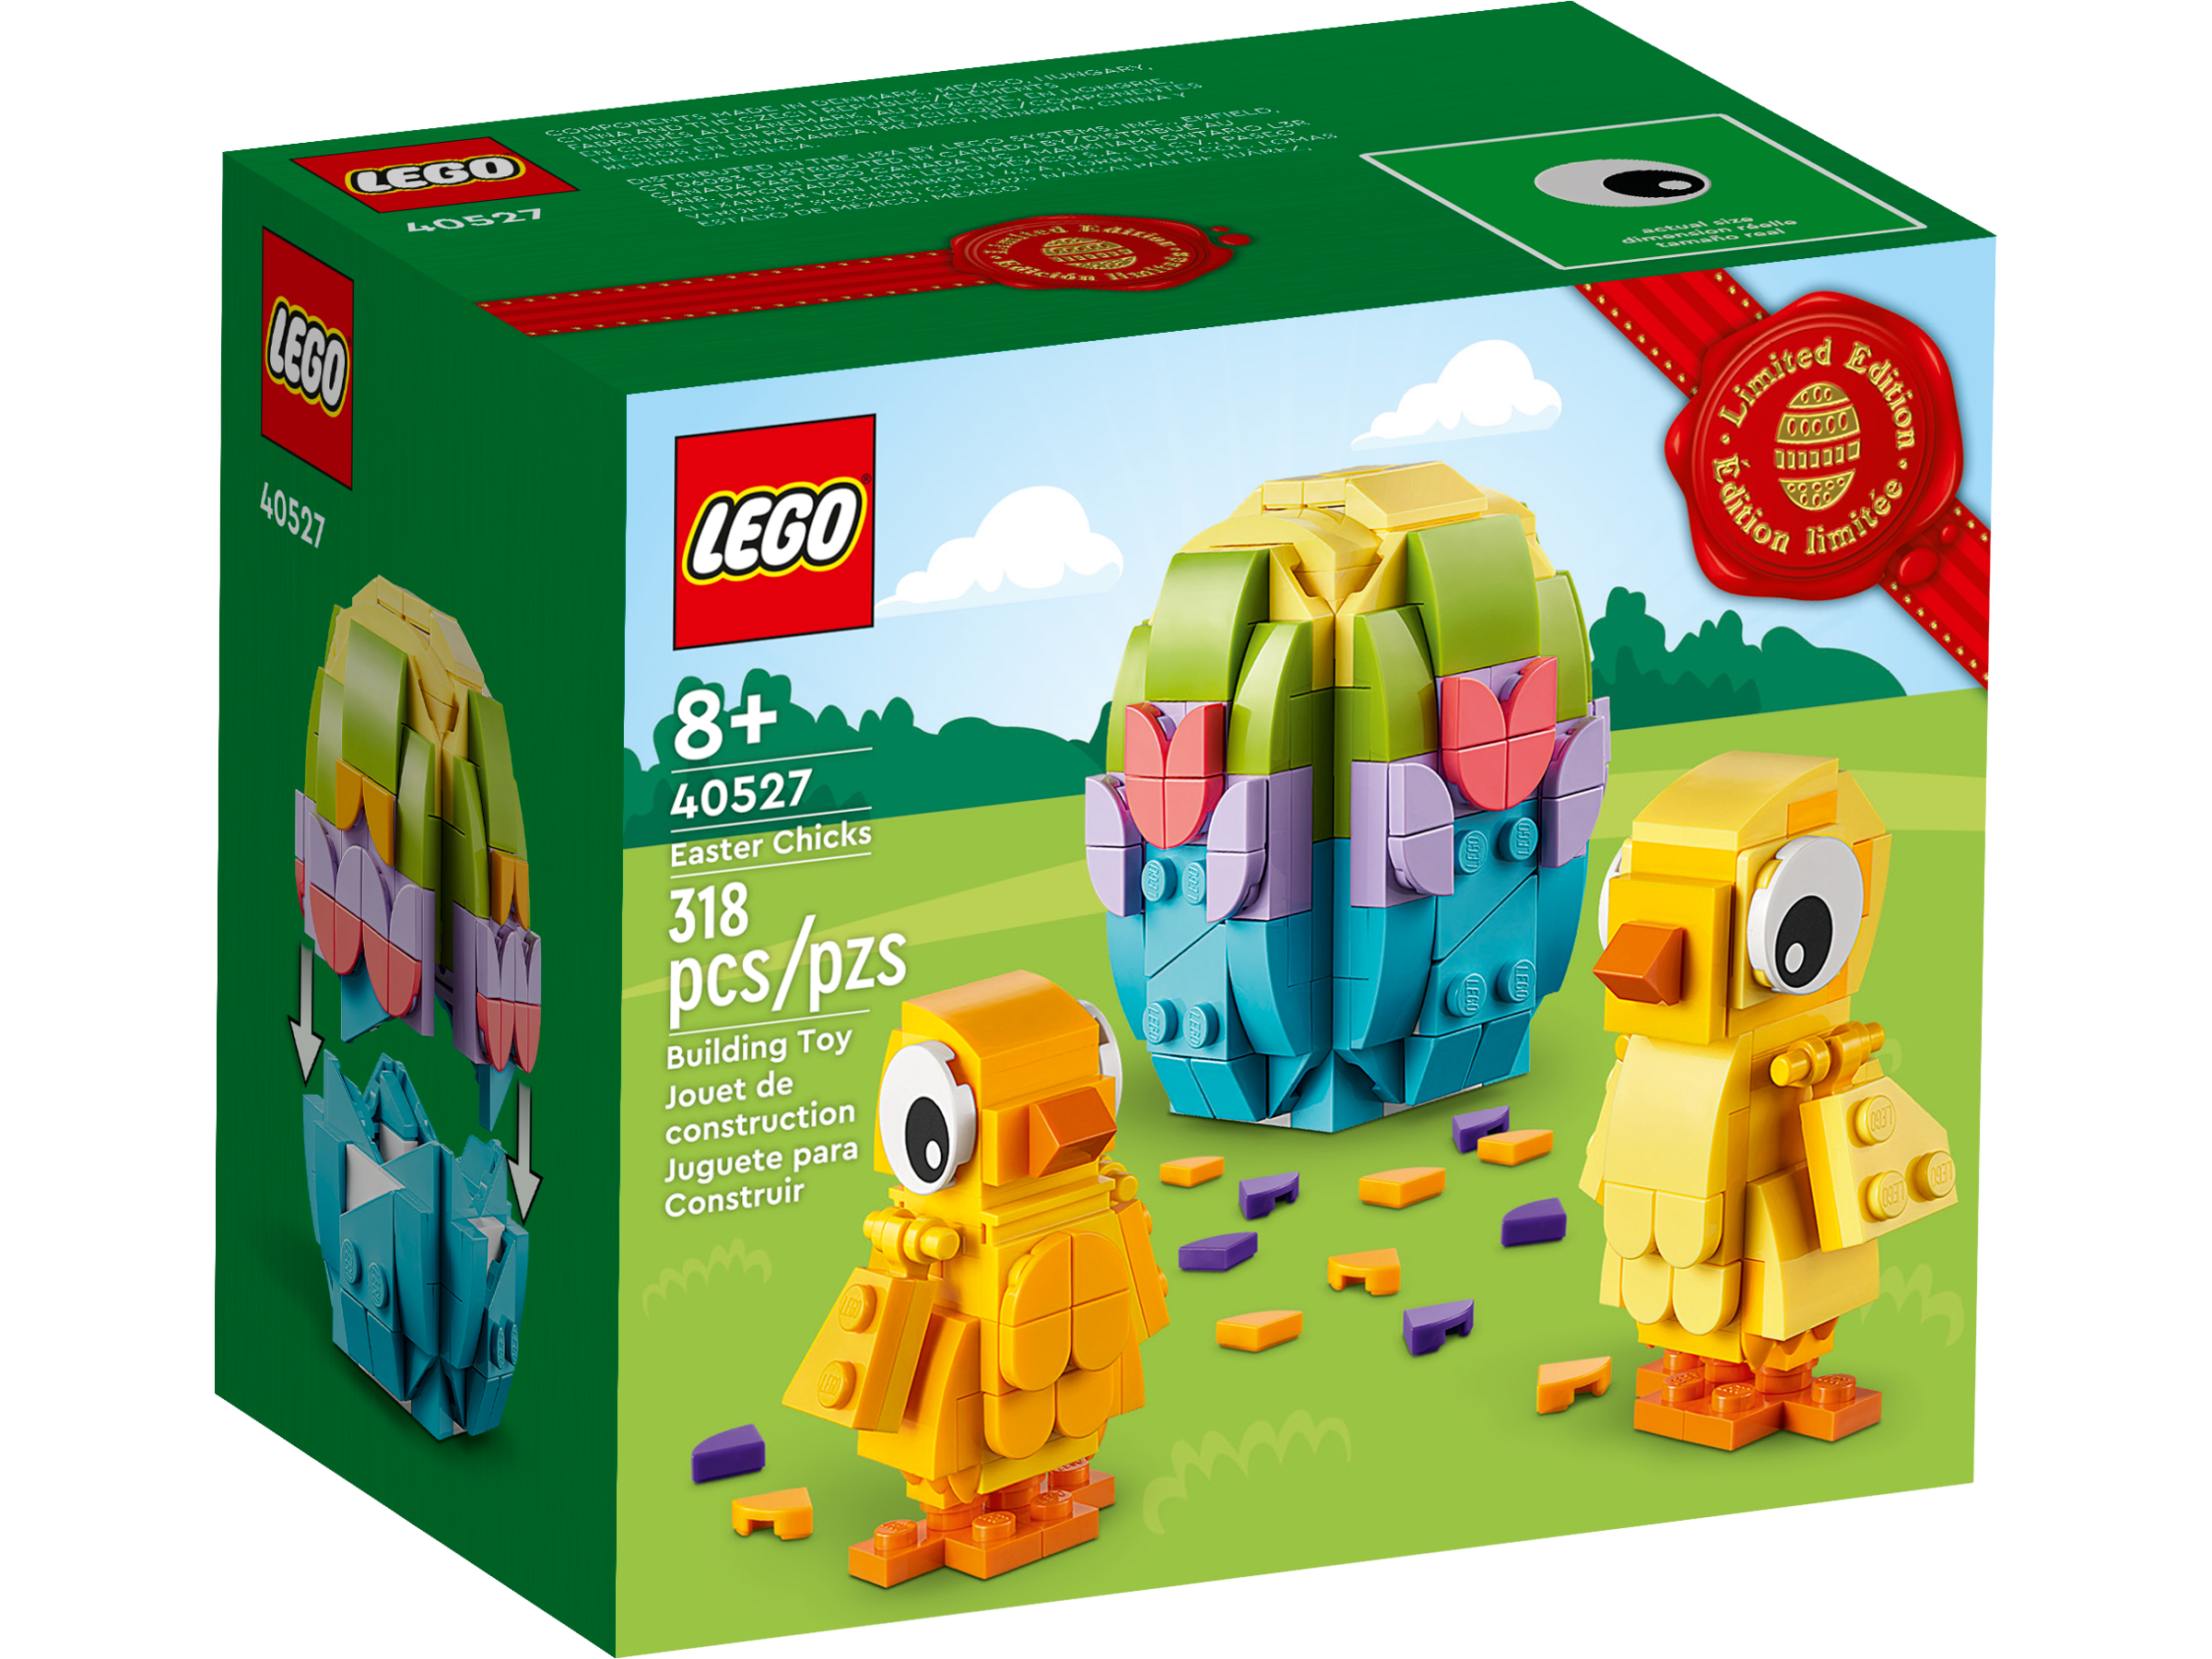 LEGO® GWP 40527 – Easter Chicks – Recensione